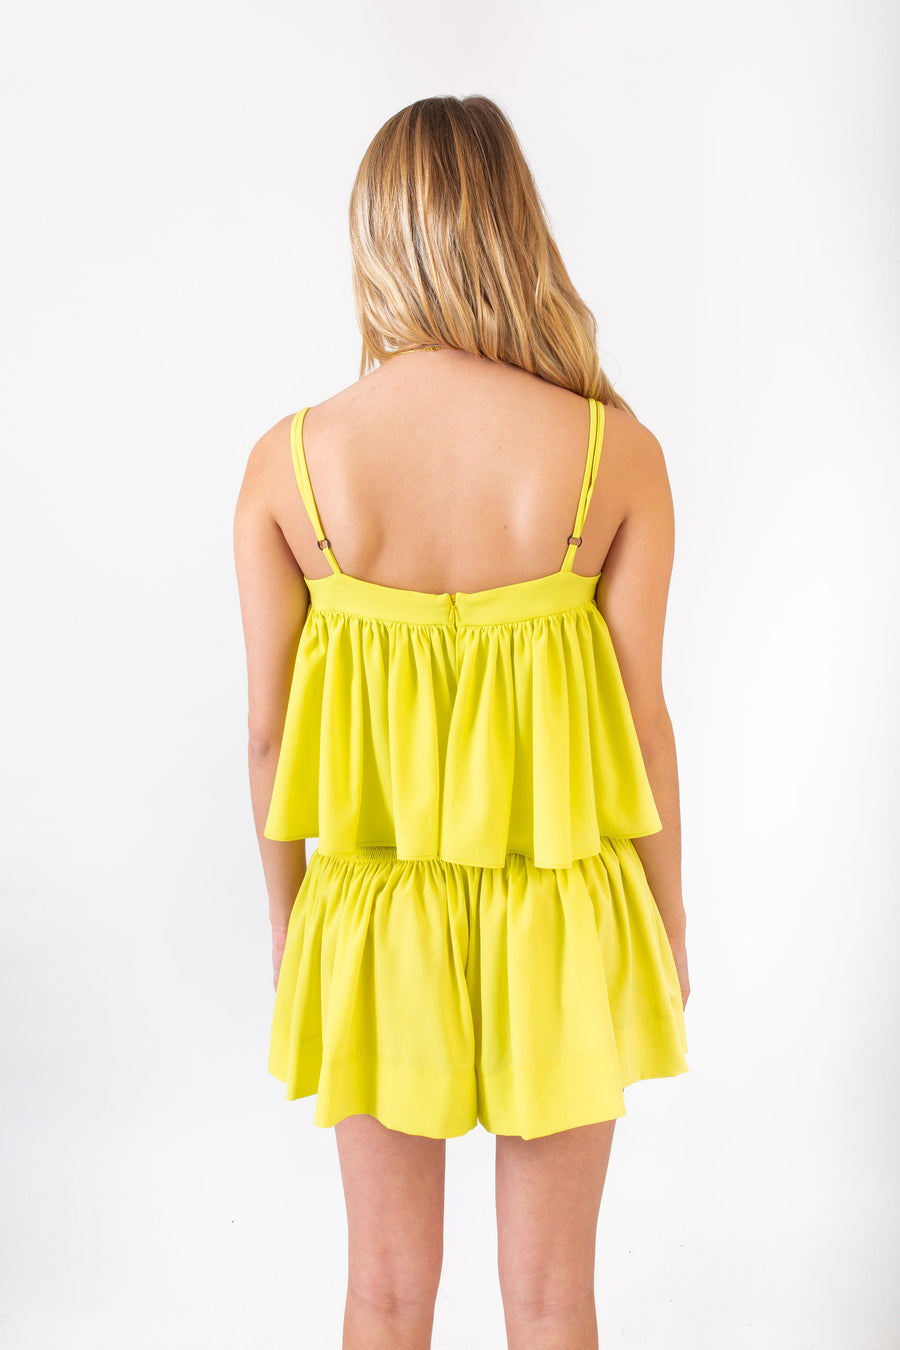 ELIZA TOP SUNRISE YELLOW *LIMITED*EDITION*